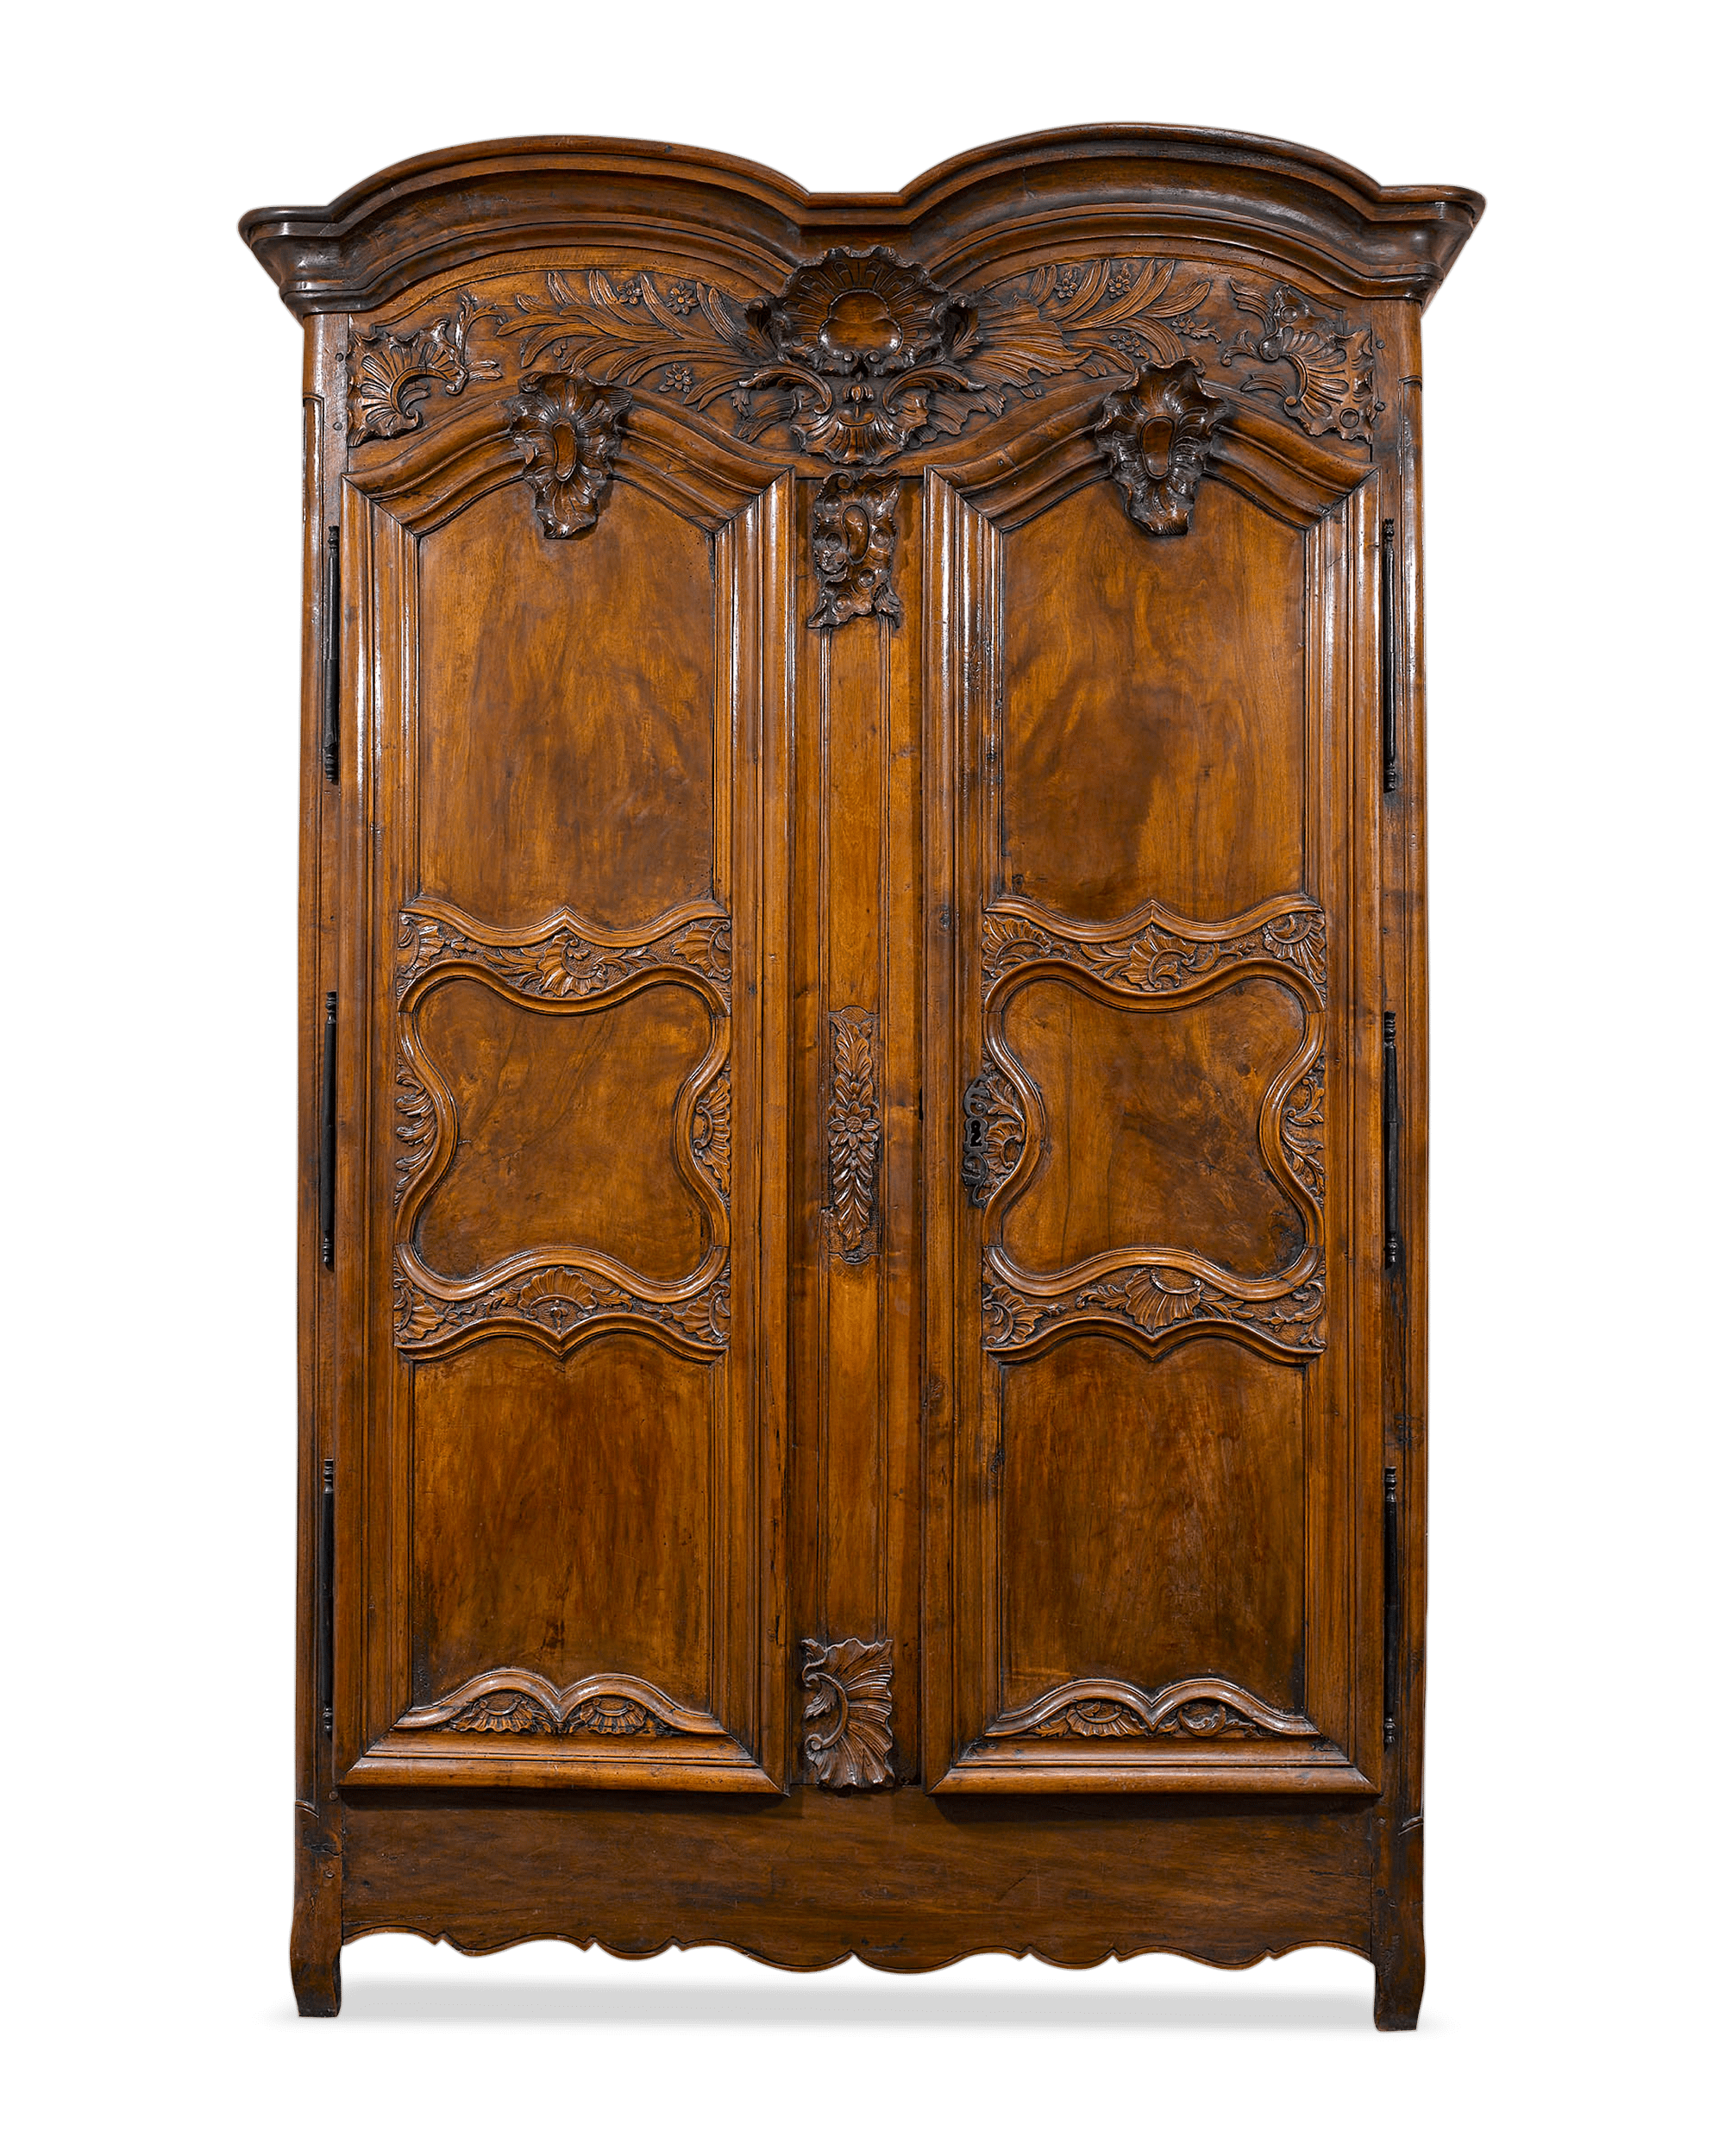 This French armoire is a grand example of Provincial furniture